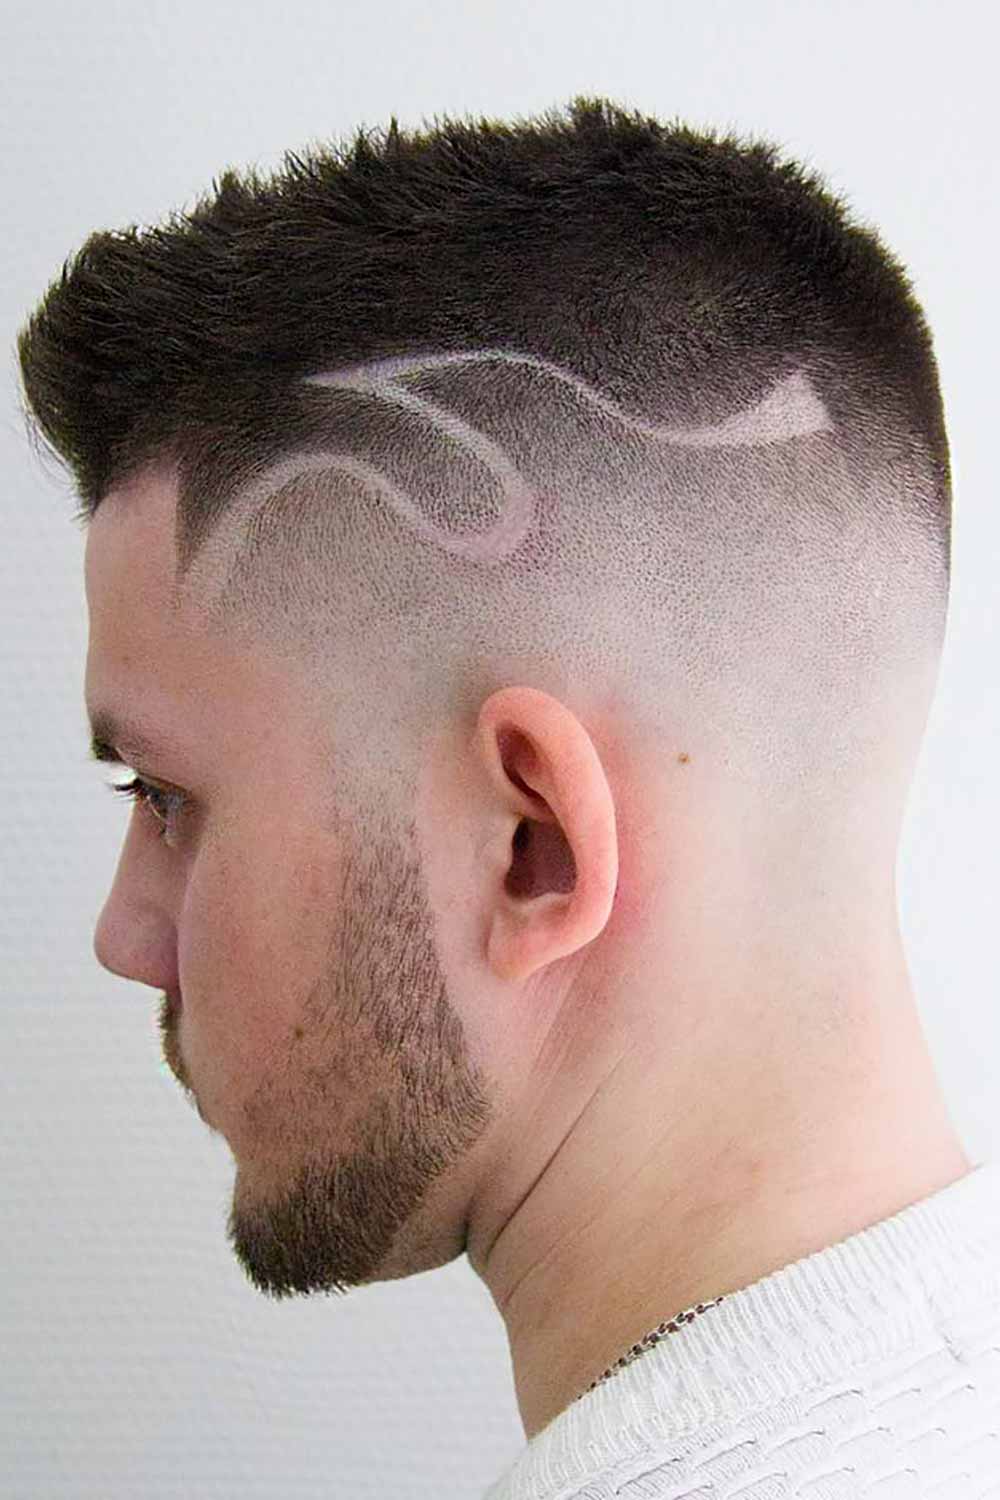 Spiked Top And Simple Design Men #highfade #fade #fadehaircut